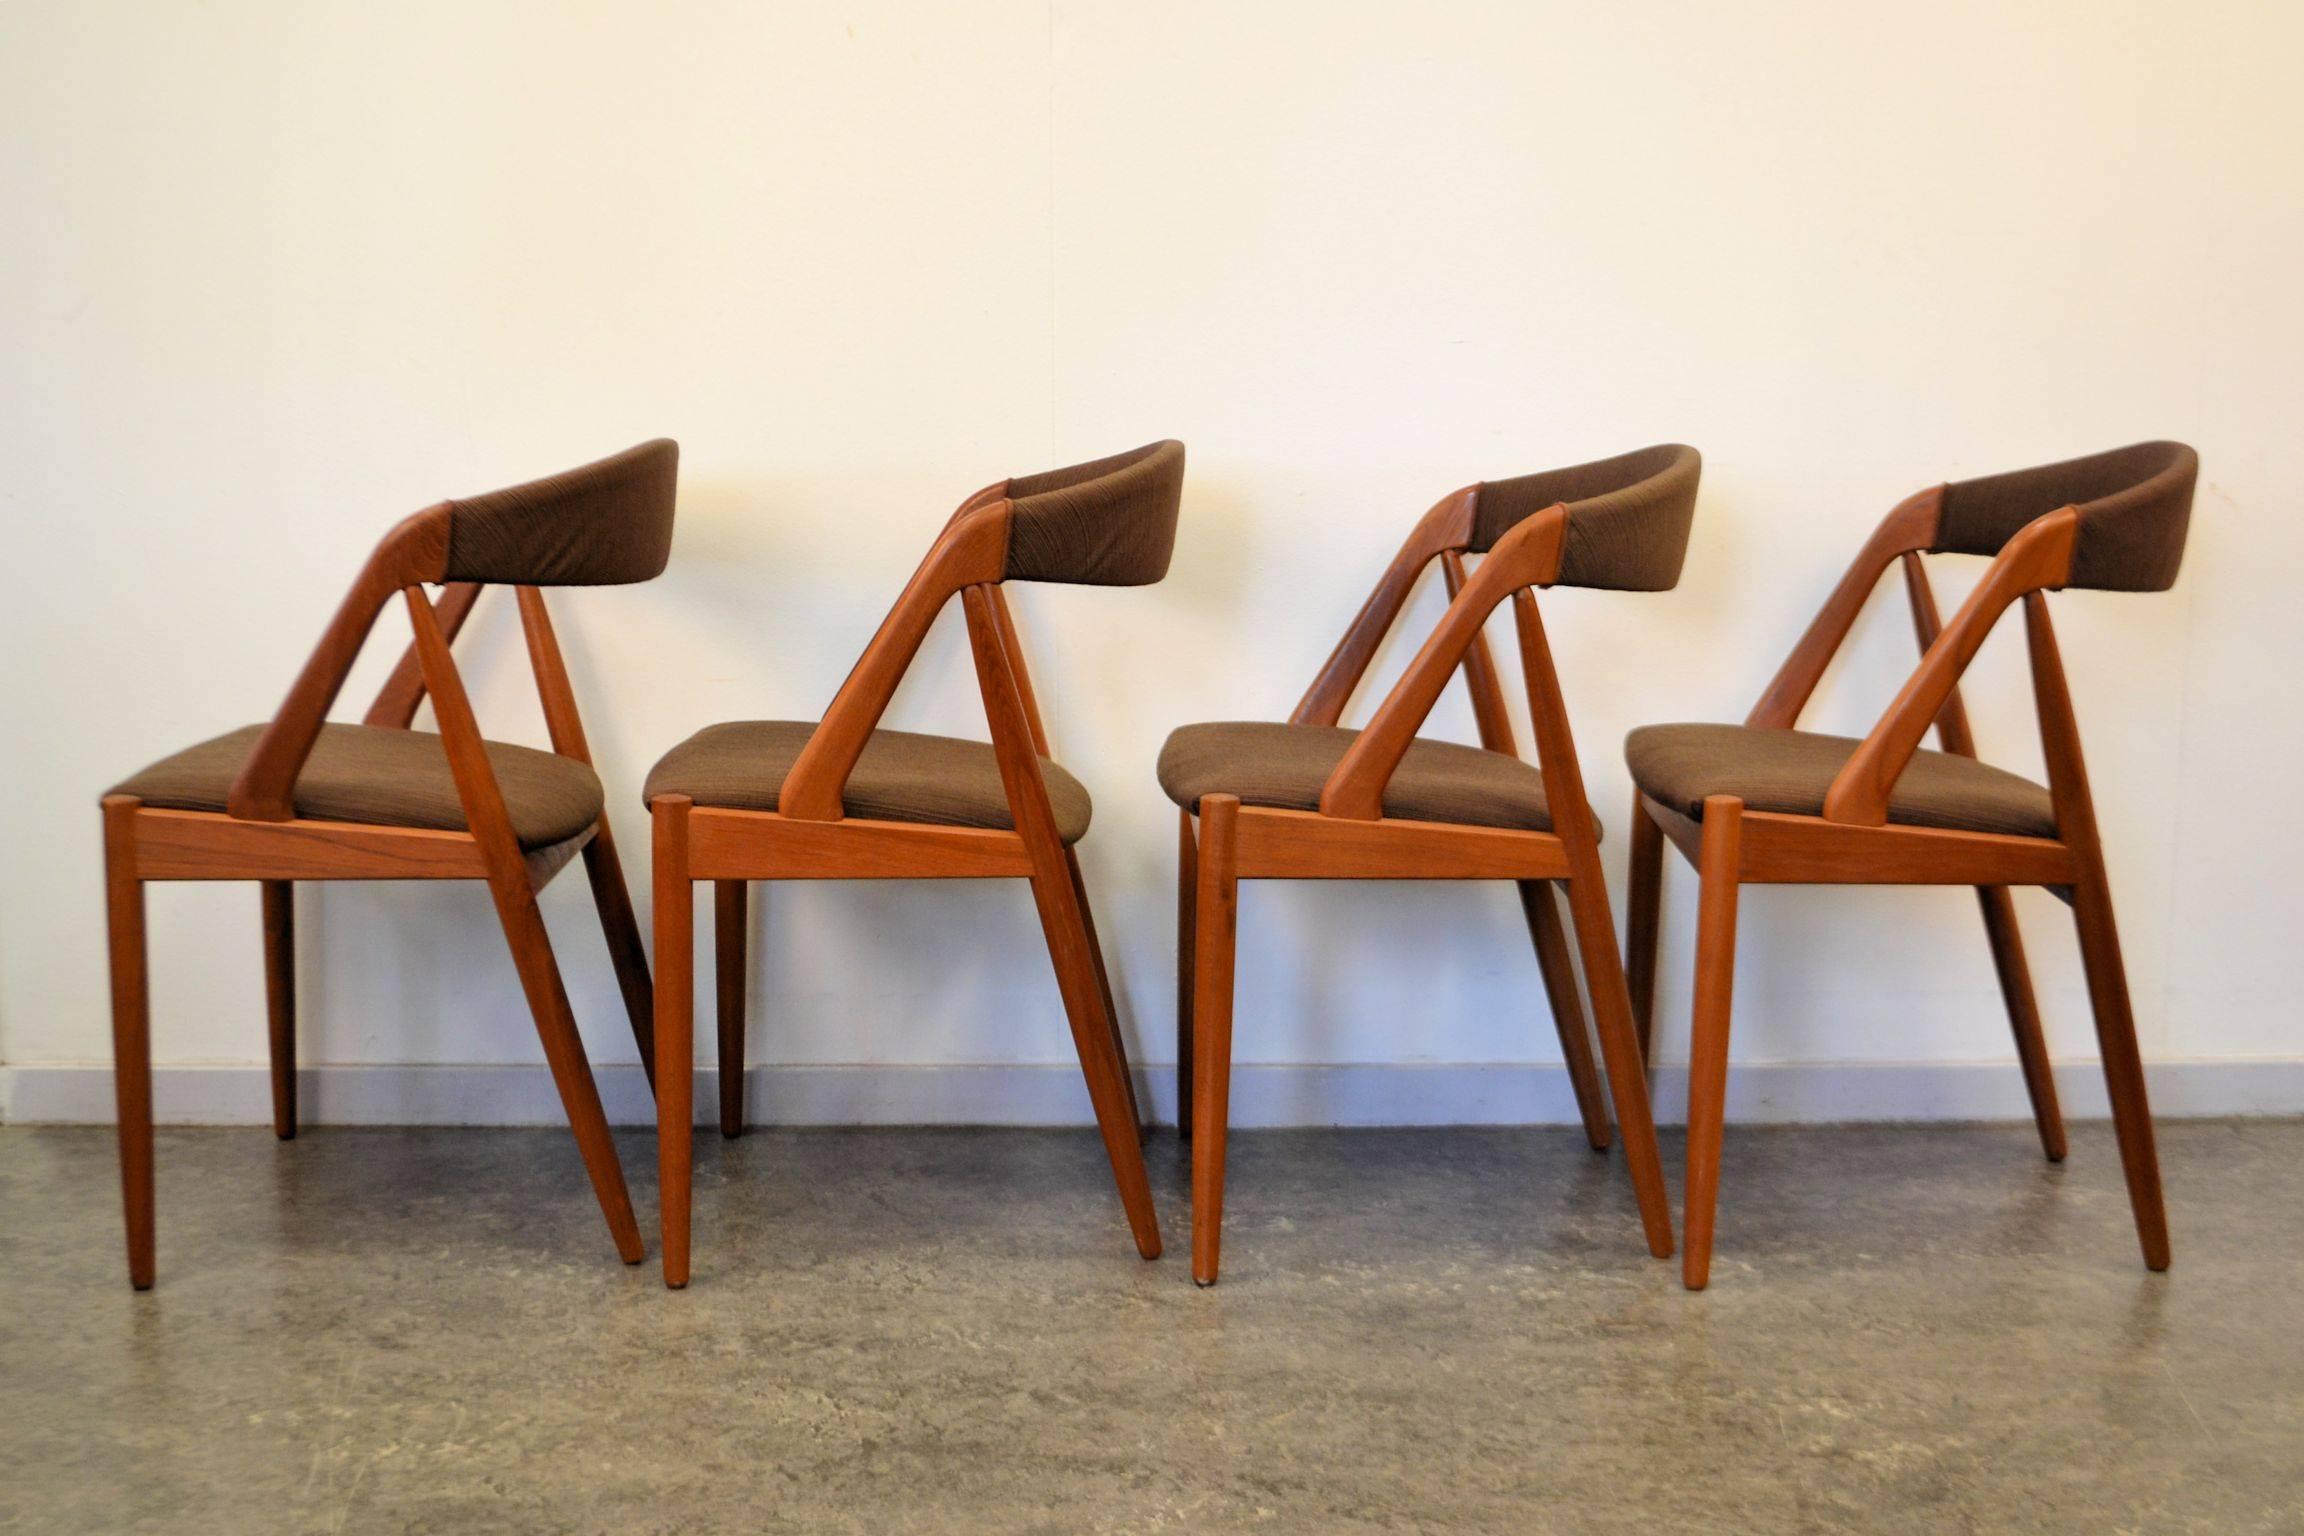 Set of four Danish Modern Kai Kristiansen model #31 dining chairs. Designed in the 1950s for Schou Andersen Møbelfabrik. Kai Kristiansen became worldwide known and celebrated for his iconic dining chair designs. The model 31 is no exception: the